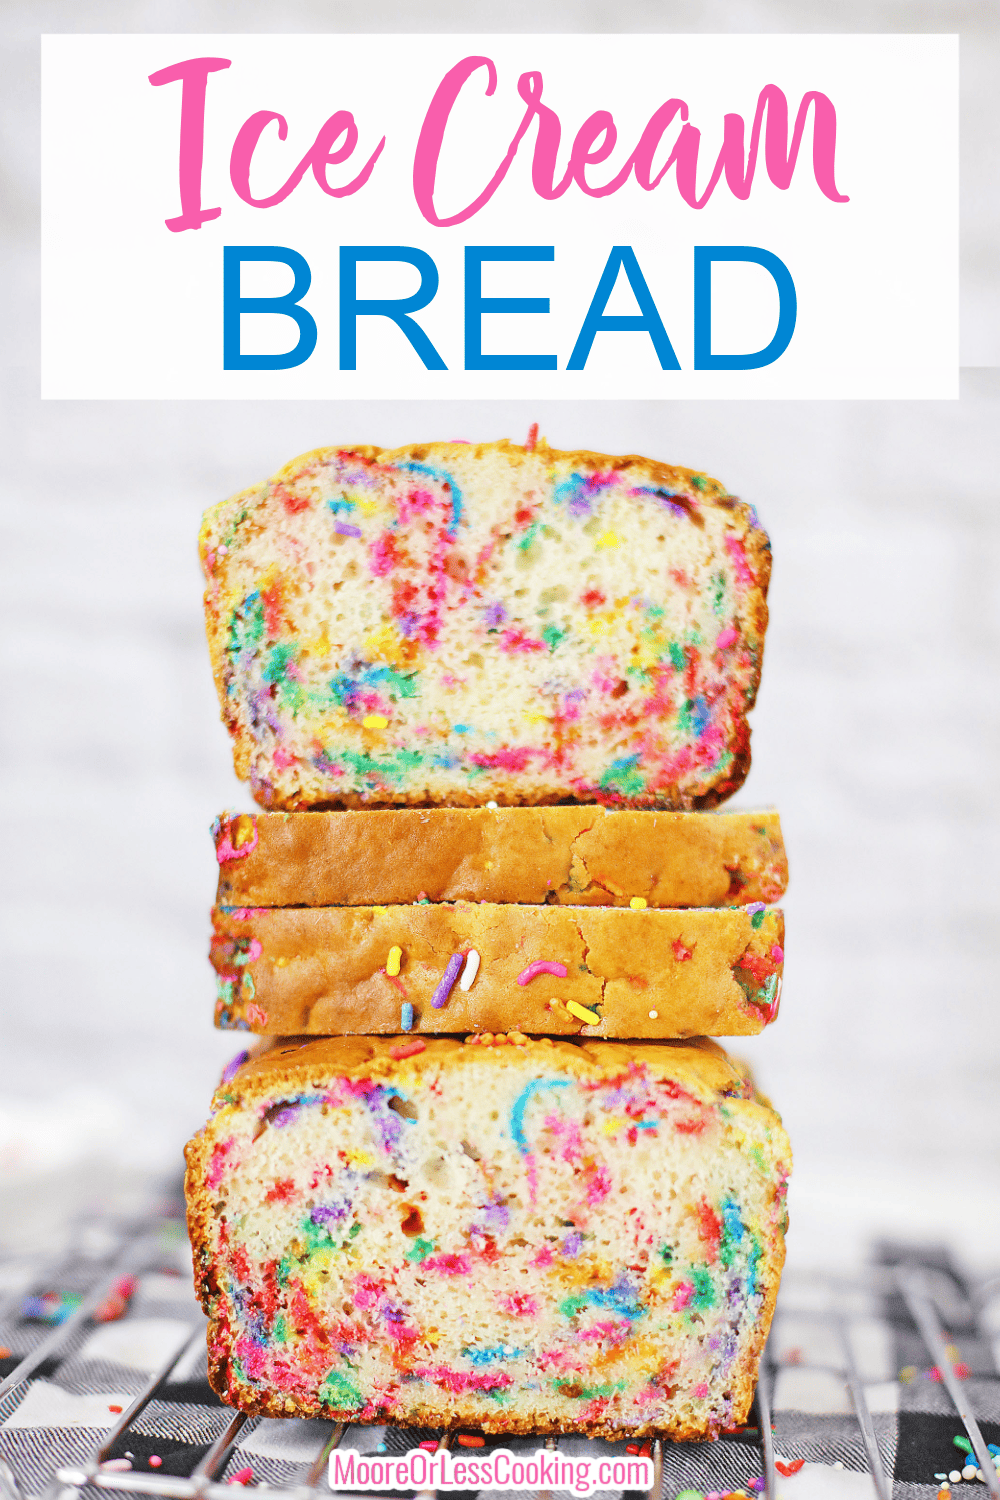 This quick bread recipe uses a base of vanilla frozen custard (or ice cream), self rising flour and sugar. I added funfetti sprinkles for a burst of color, but you can customize this Ice Cream Bread recipe with other flavors and add-ins, as well. The options are endless! via @Mooreorlesscook